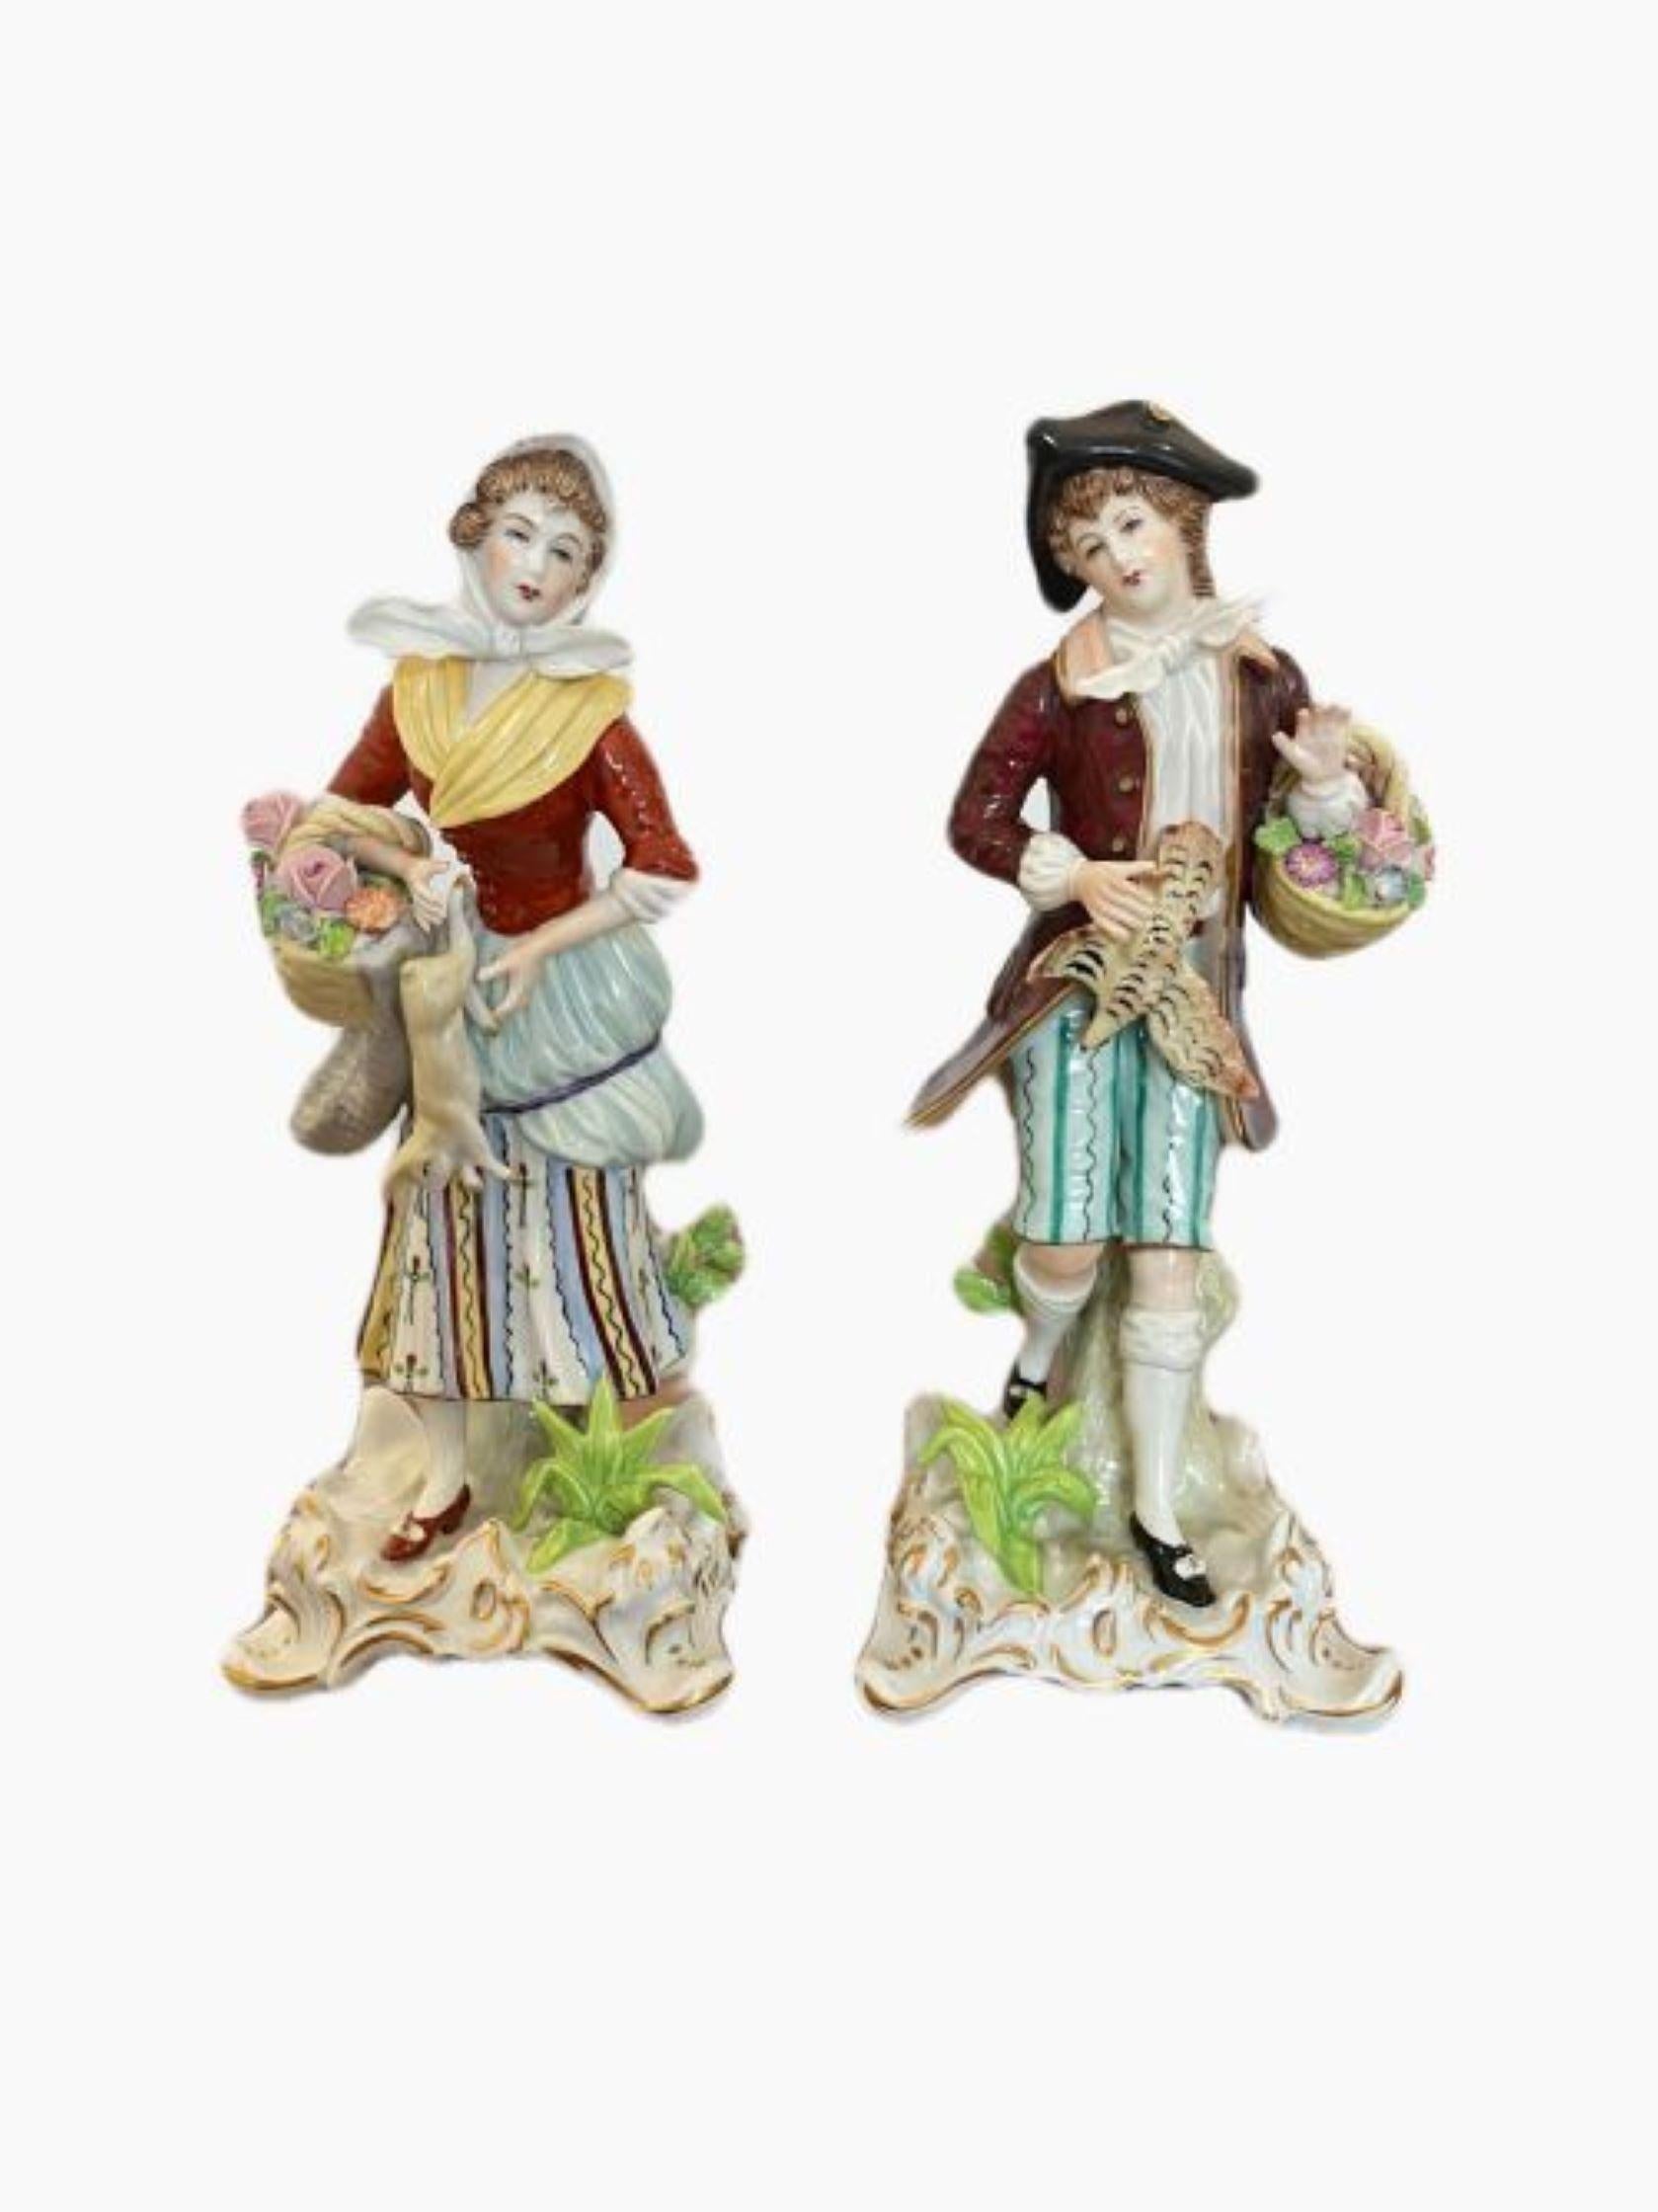 Pair of antique porcelain figures holding a basket of flowers in wonderful colourful period clothing in red, yellow, green and blue colours standing on a shaped base with gilded scrolls